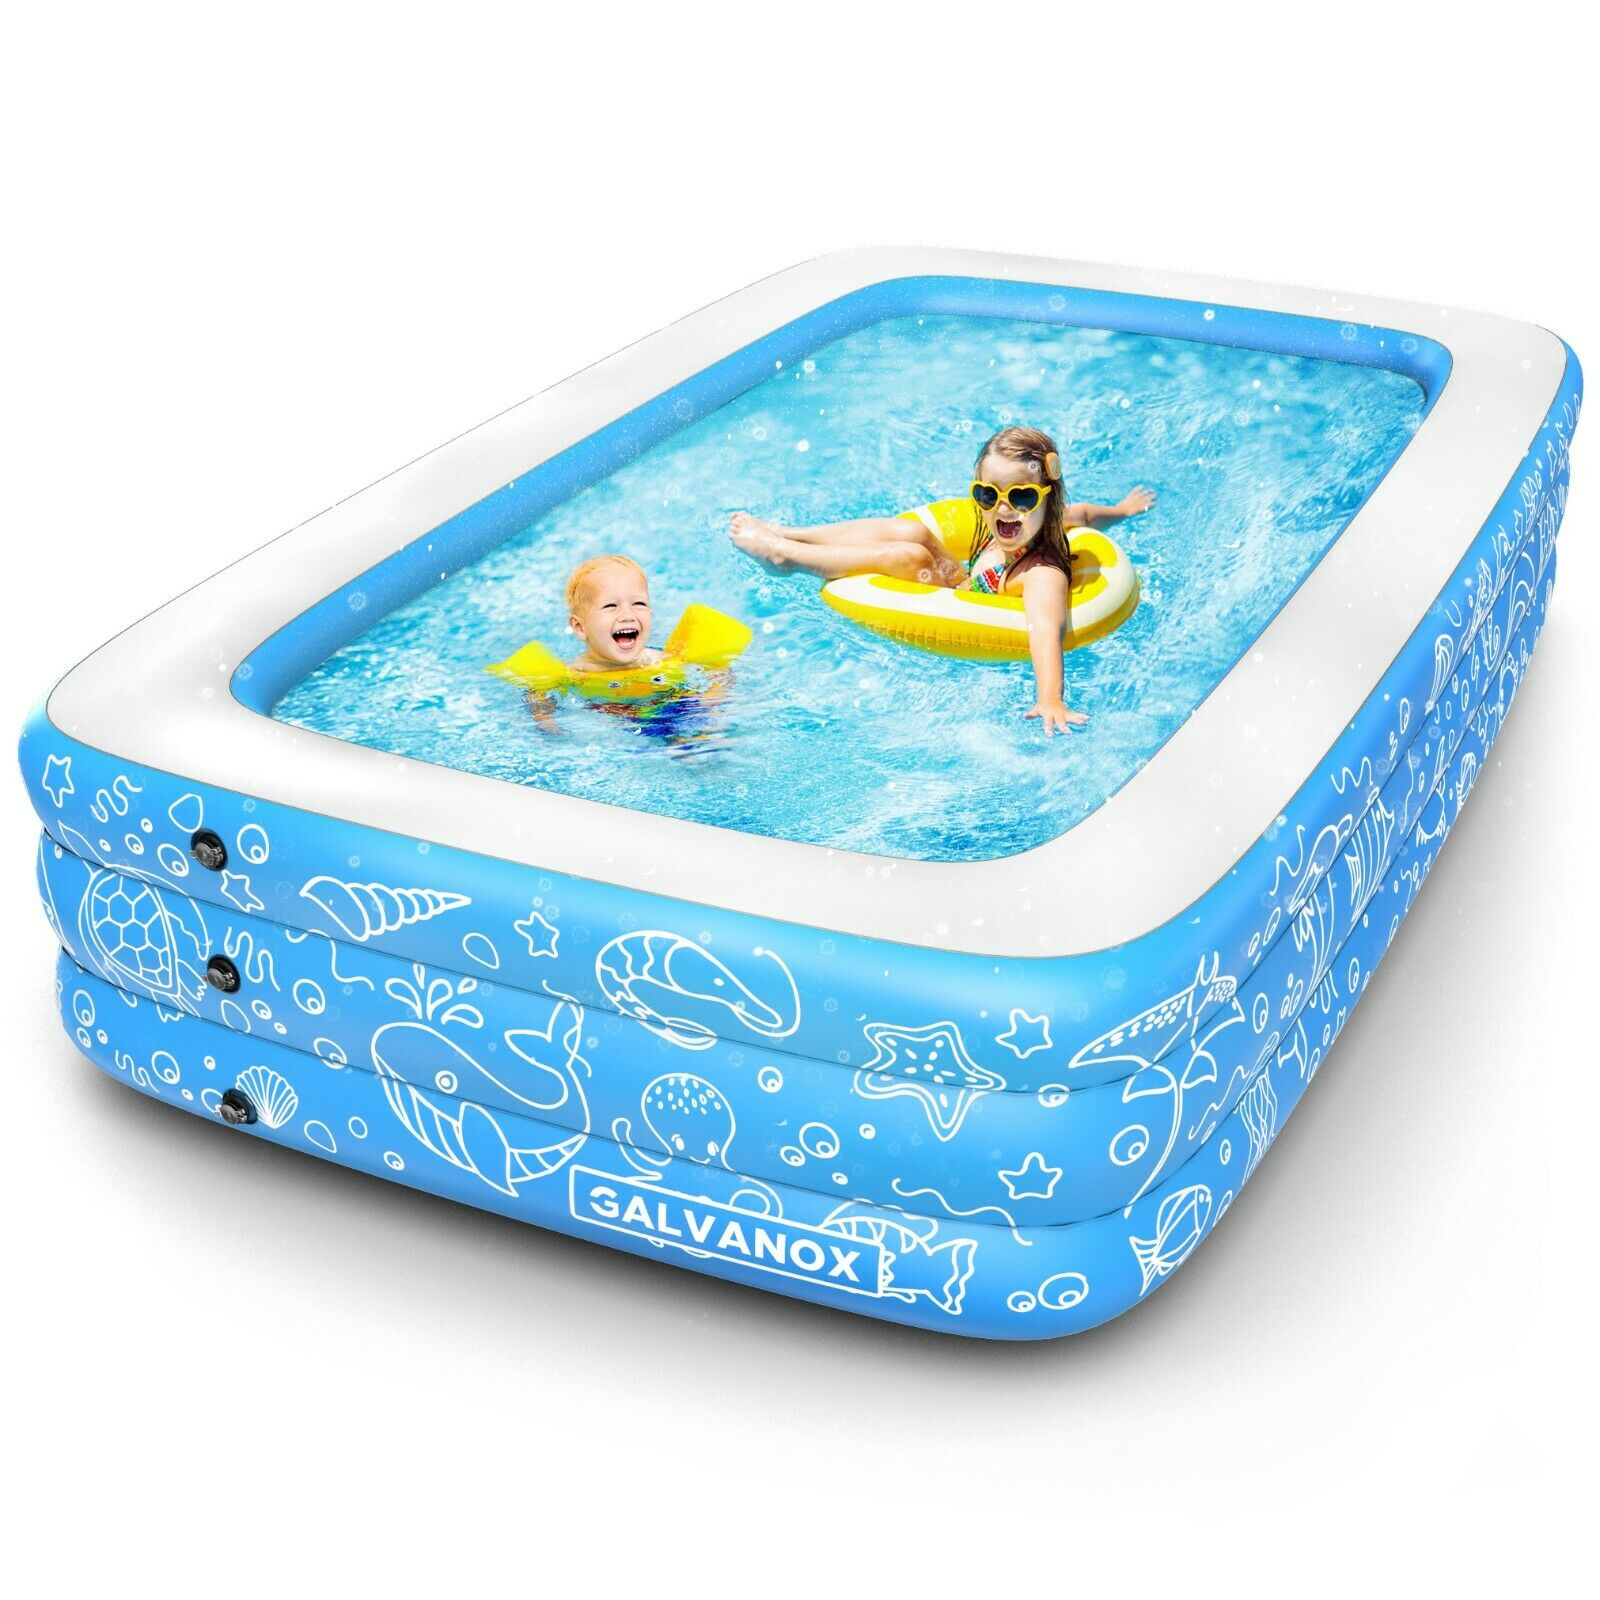 Inflatable Pool Above Ground Swimming Pool For Kiddie/kids 22" Deep 10x6ft Blue